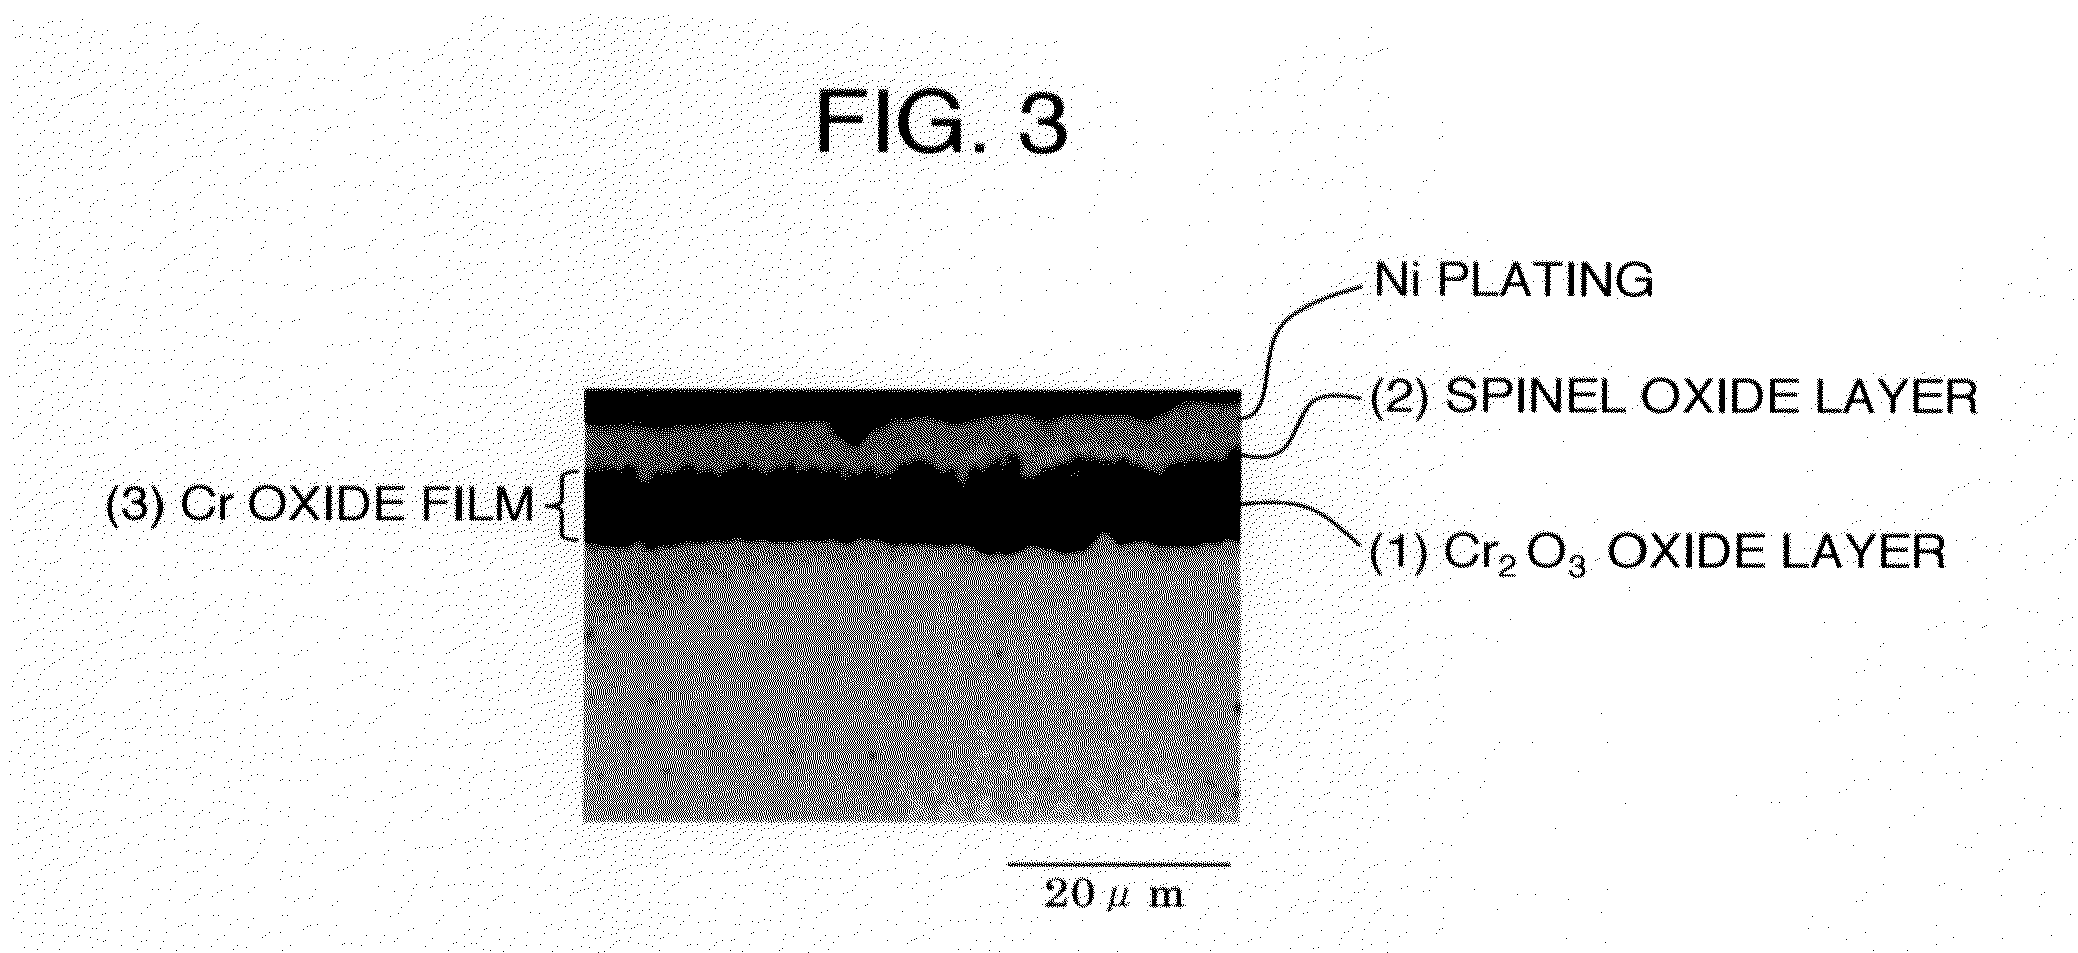 Steel for solid oxide fuel cell having excellent oxidation resistance